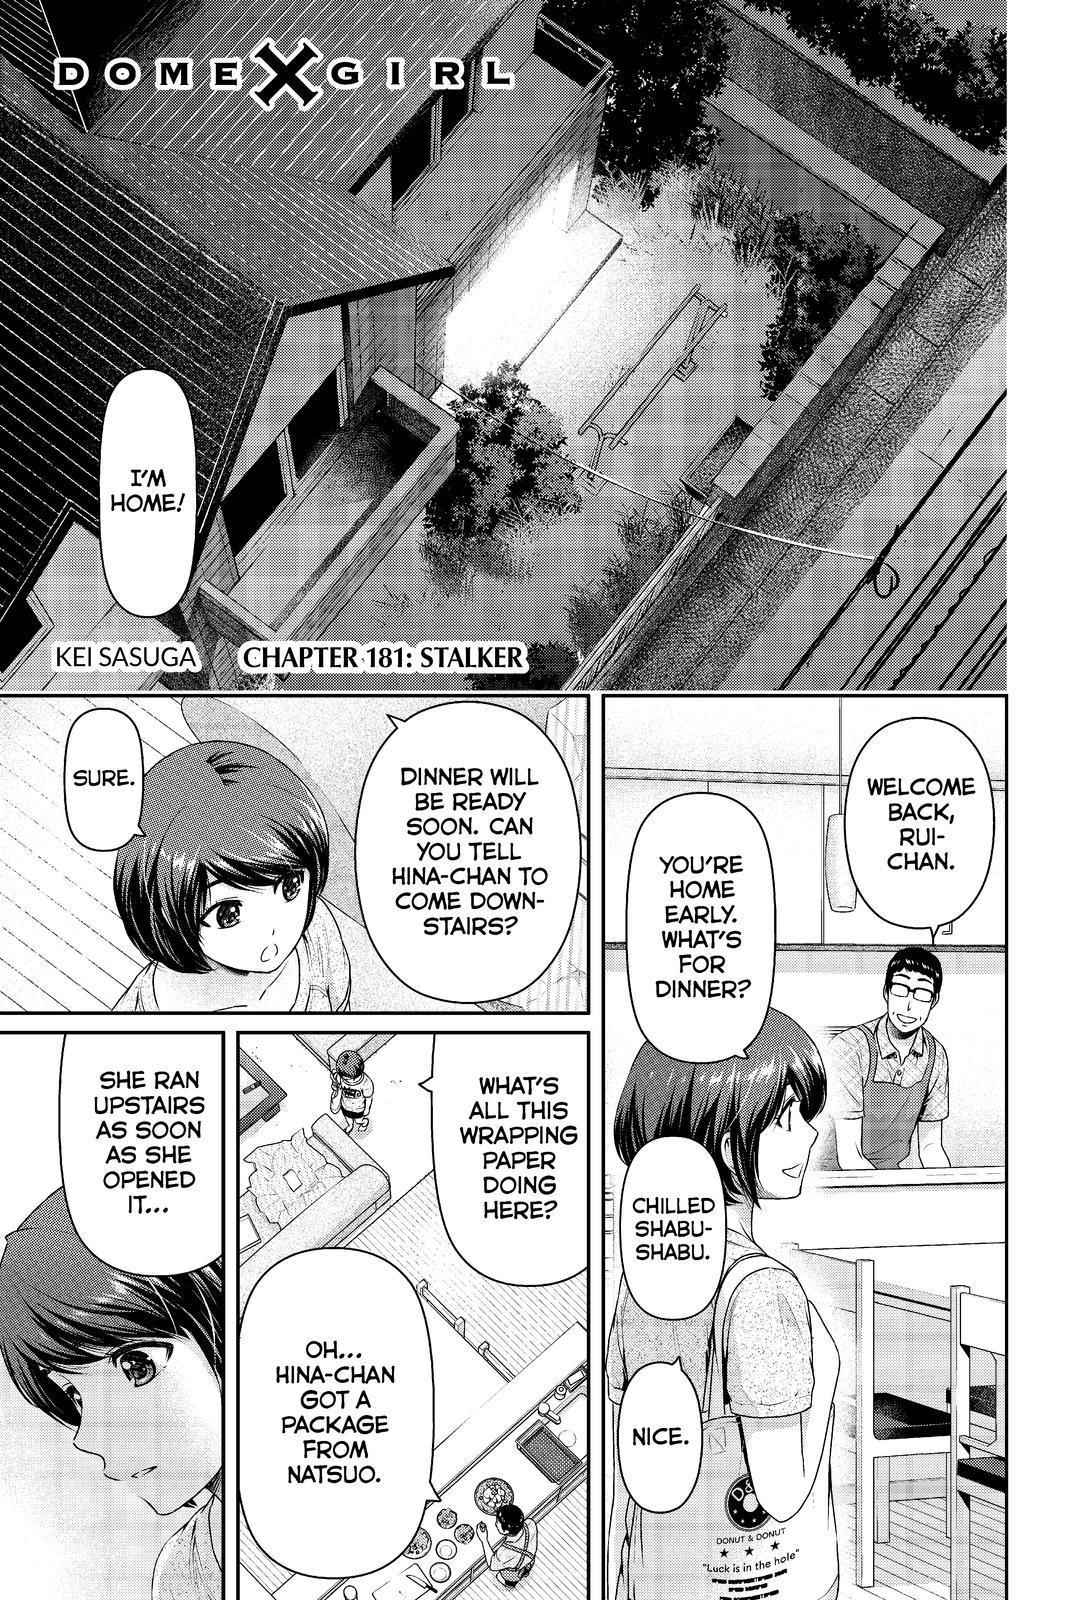 Domestic Girlfriend Manga – A Spoilery Look at How an Author can